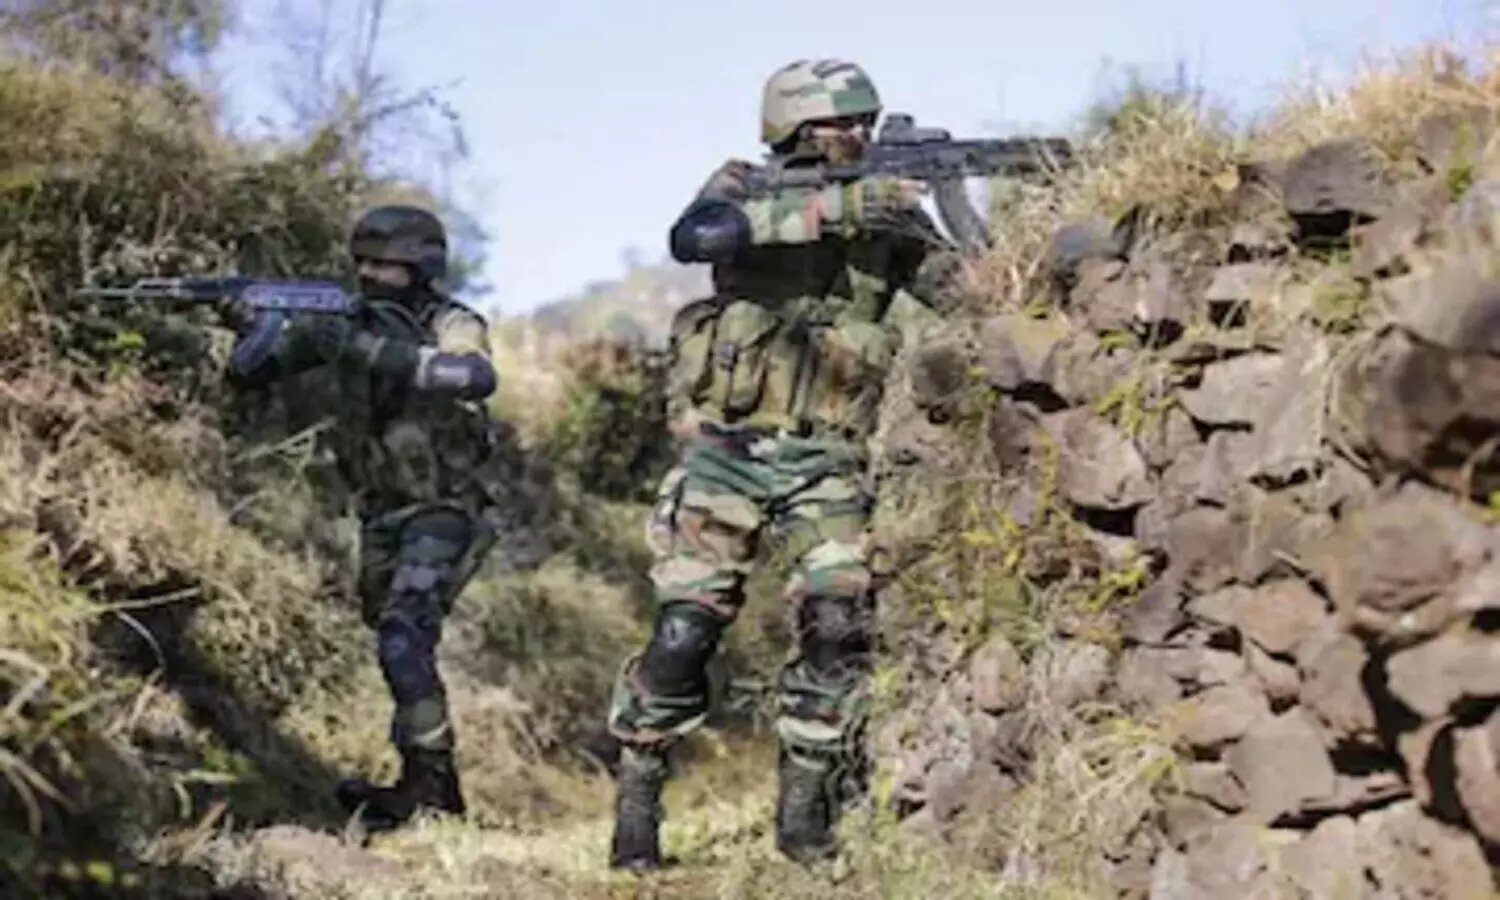 Security forces killed 3 terrorists in Shopian